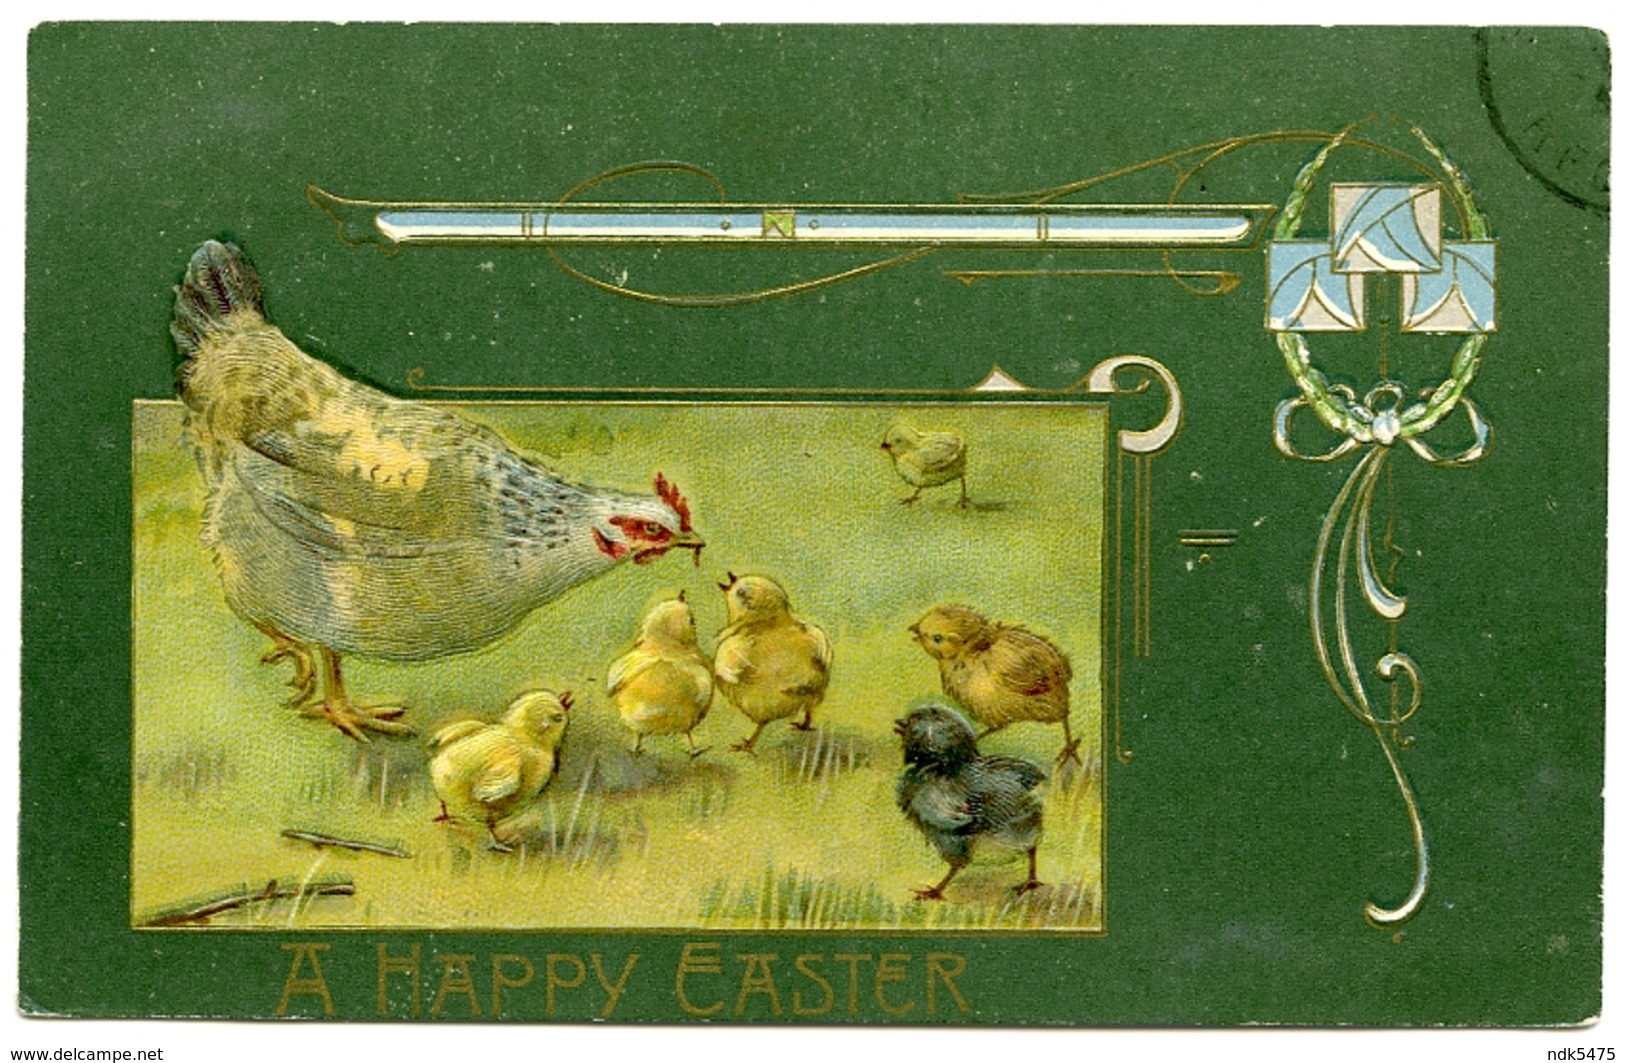 A HAPPY EASTER : HEN WITH CHICKS (ART NOUVEAU - EMBOSSED) - Easter